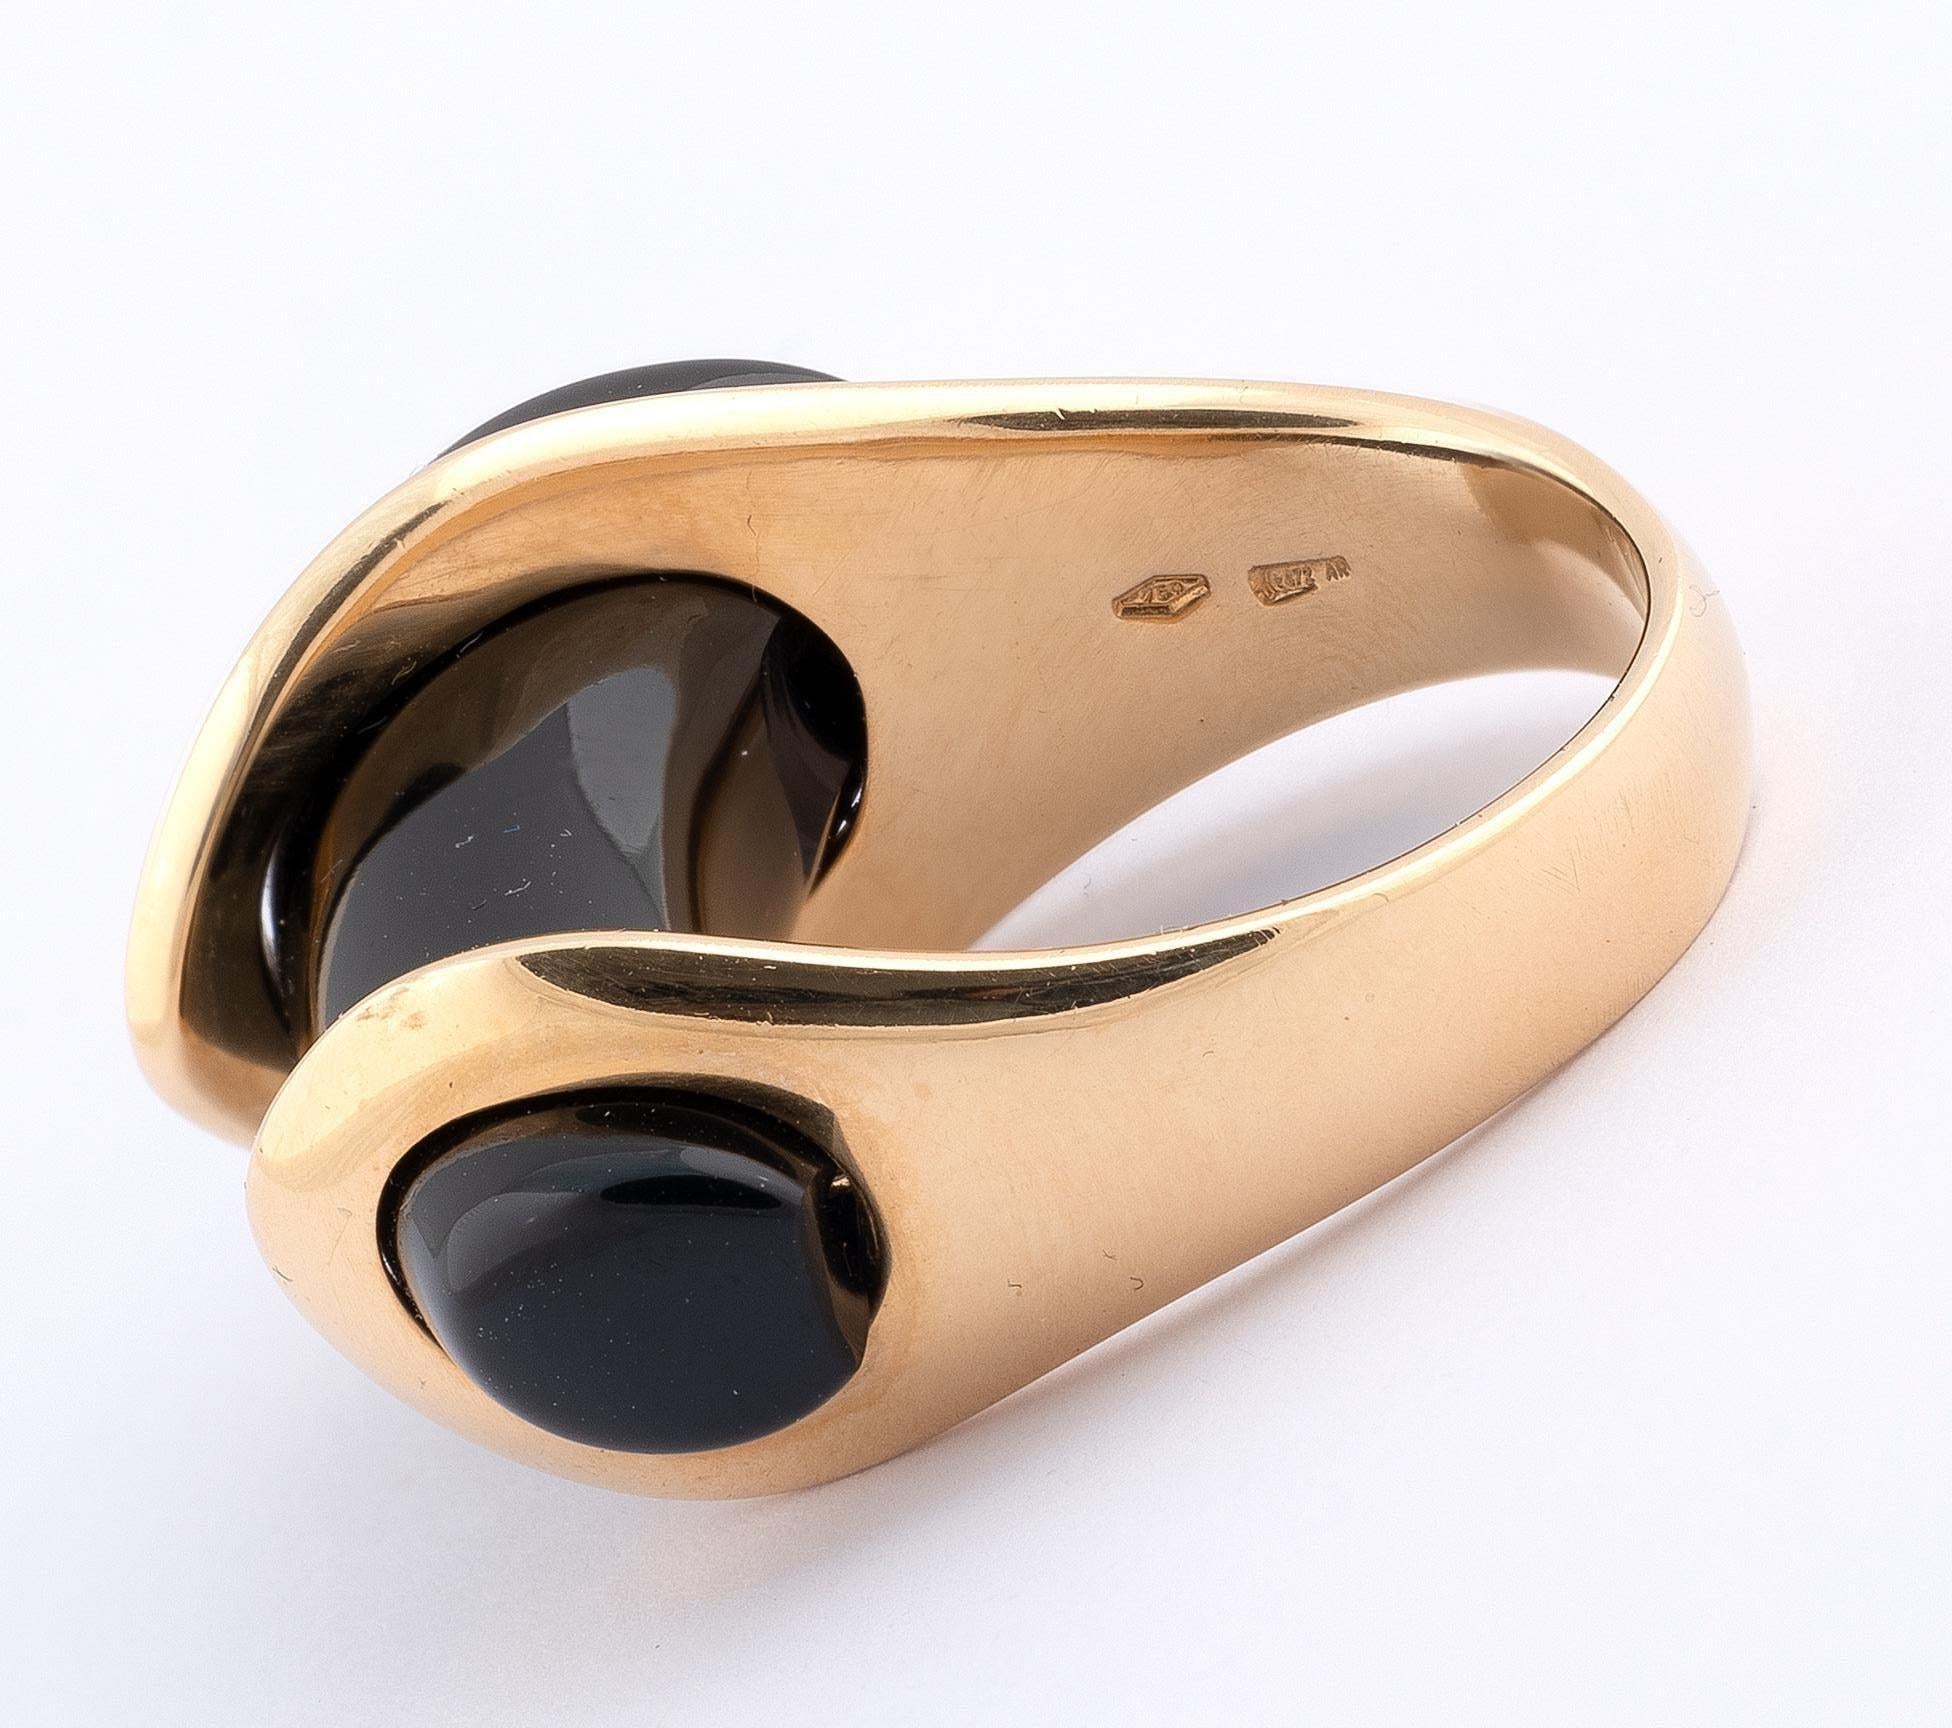 Modern design gold and onyx ring
Weight 15,70gr.
Size : 6 1/4
Signed Gucci